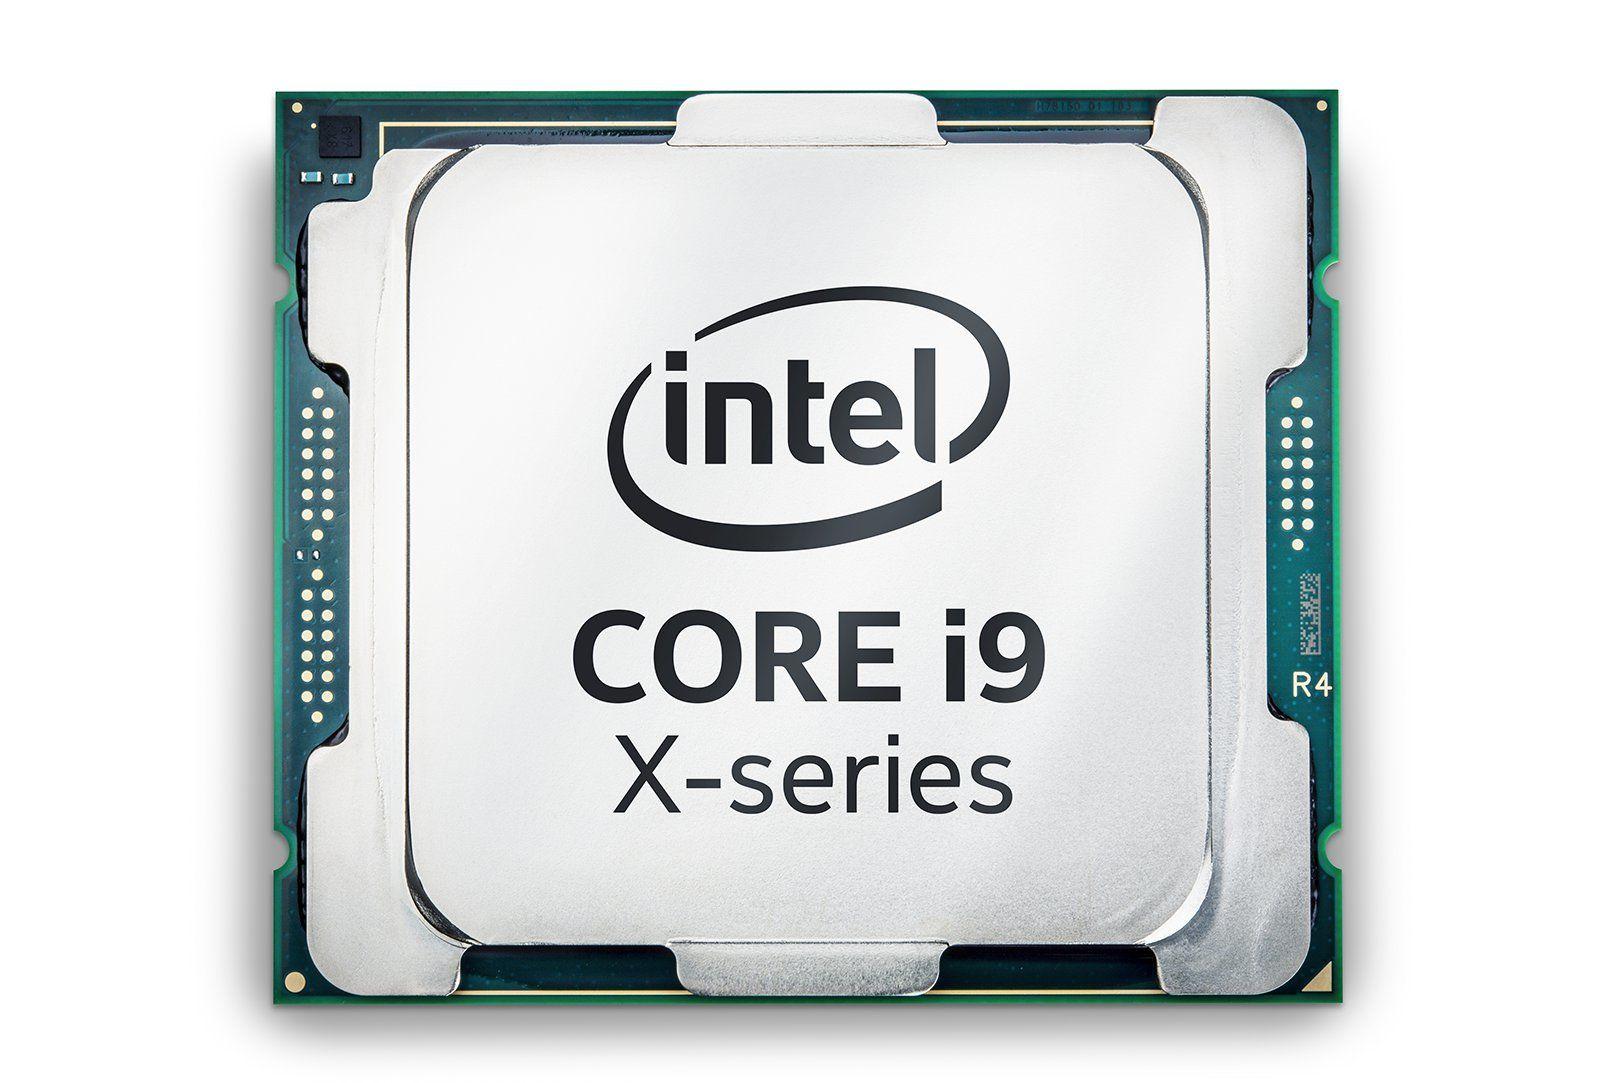 CPU Intel Logo - Intel's Core i9 Extreme Edition CPU is an 18-core beast